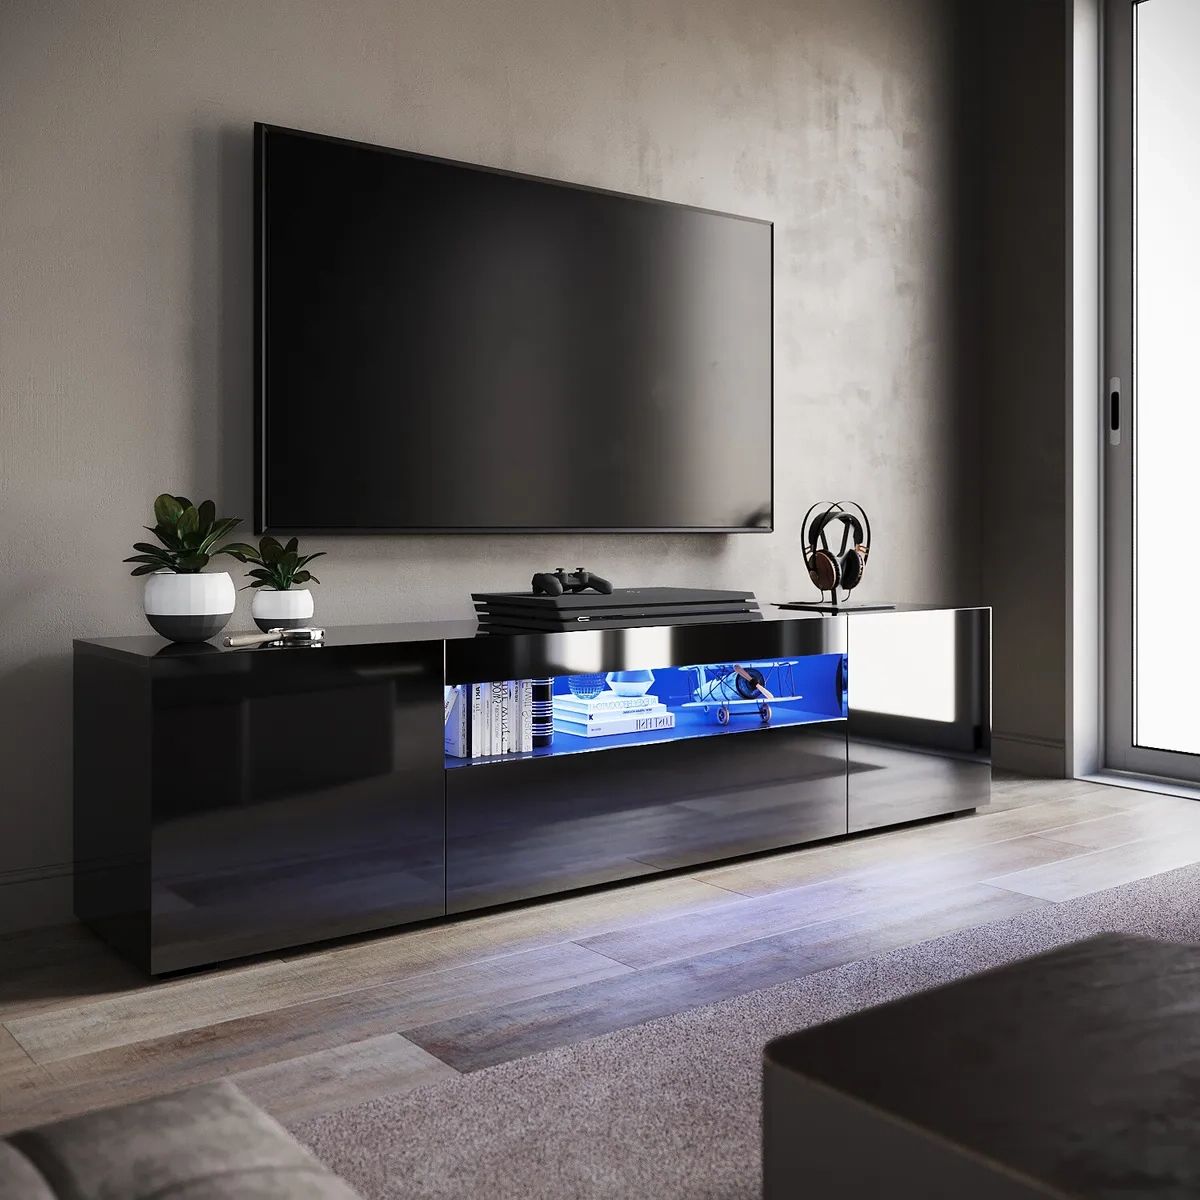 200cm High Gloss Tv Stand Black Cabinet Unit Doors Storage With Rgb Led  Cupboard | Ebay In Black Rgb Entertainment Centers (Gallery 10 of 20)